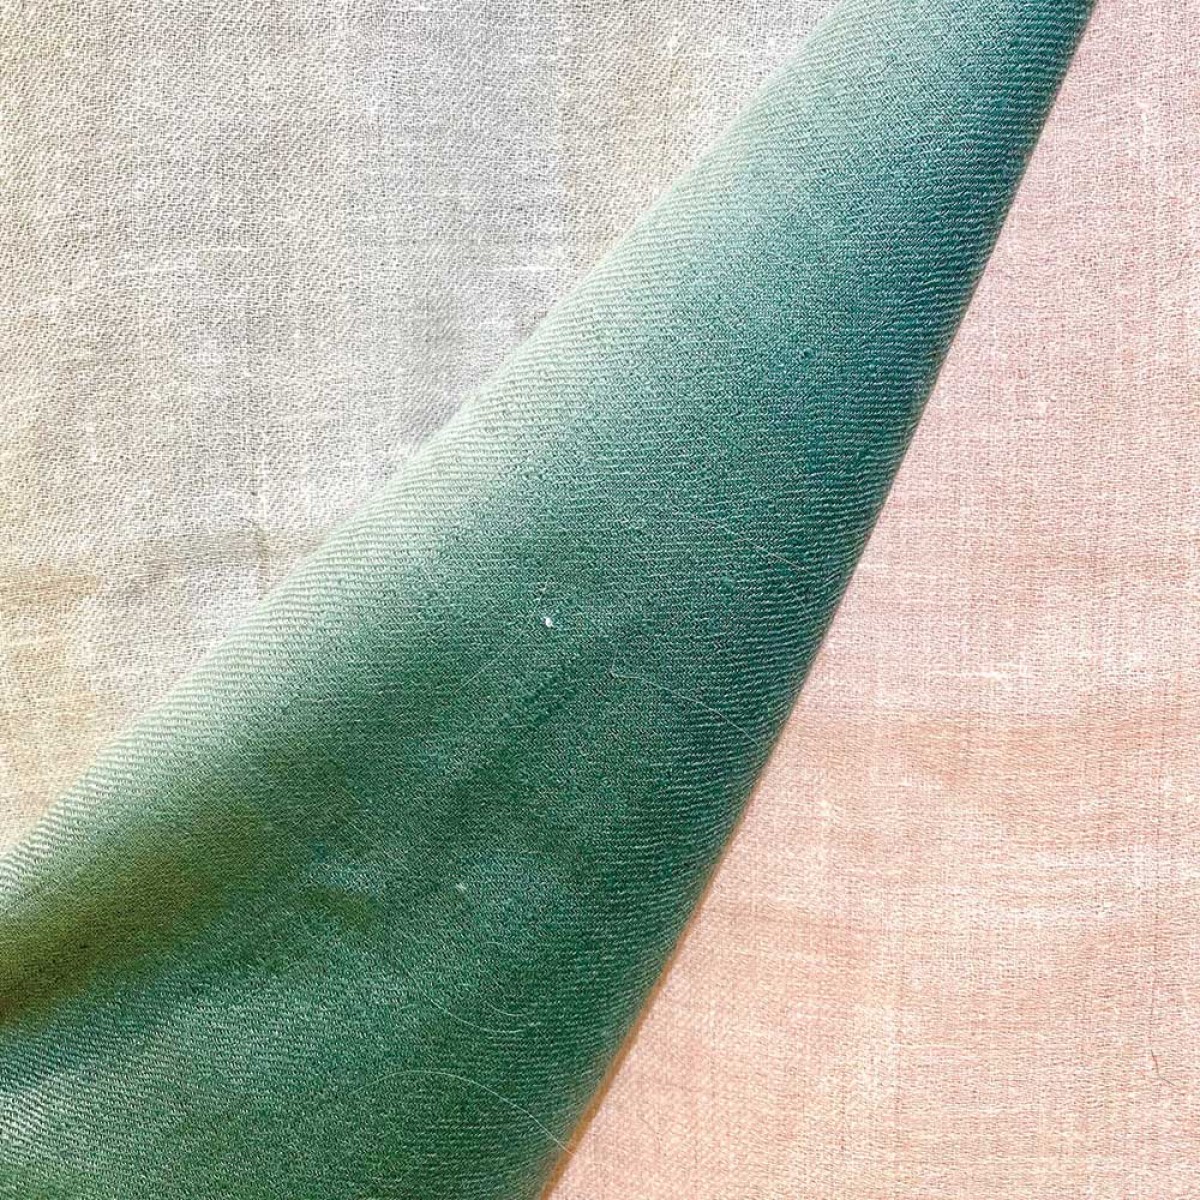 Ombre Pashmina Shawl - Pink Moss Green